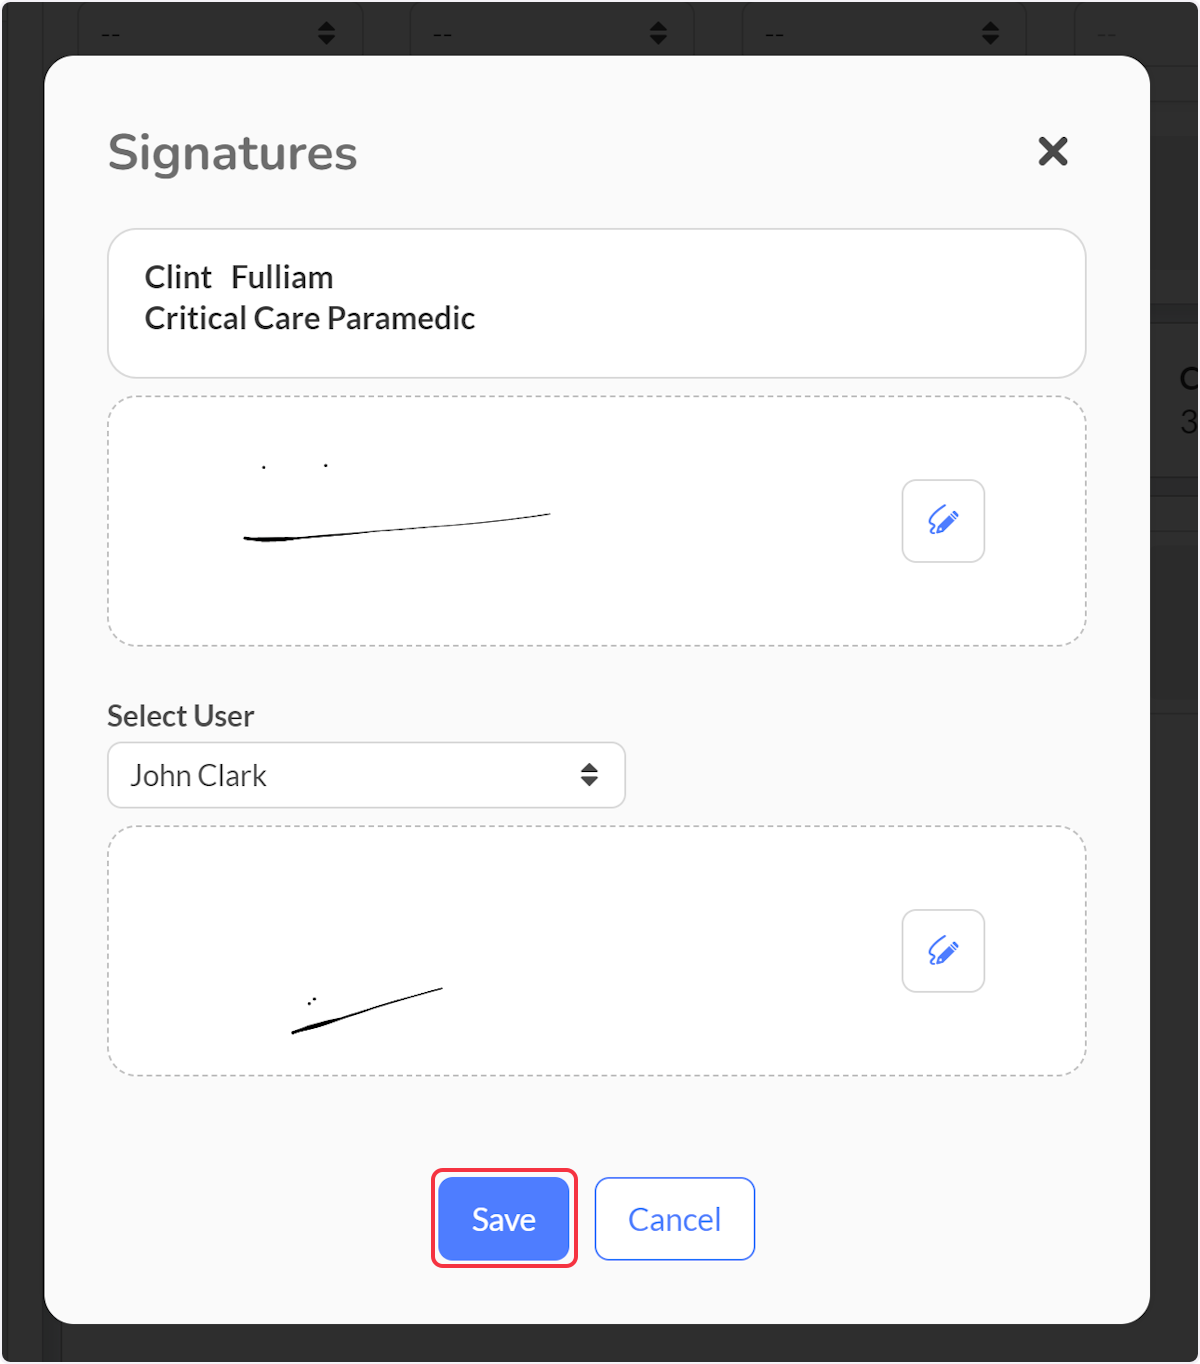 Obtain signatures then select save.